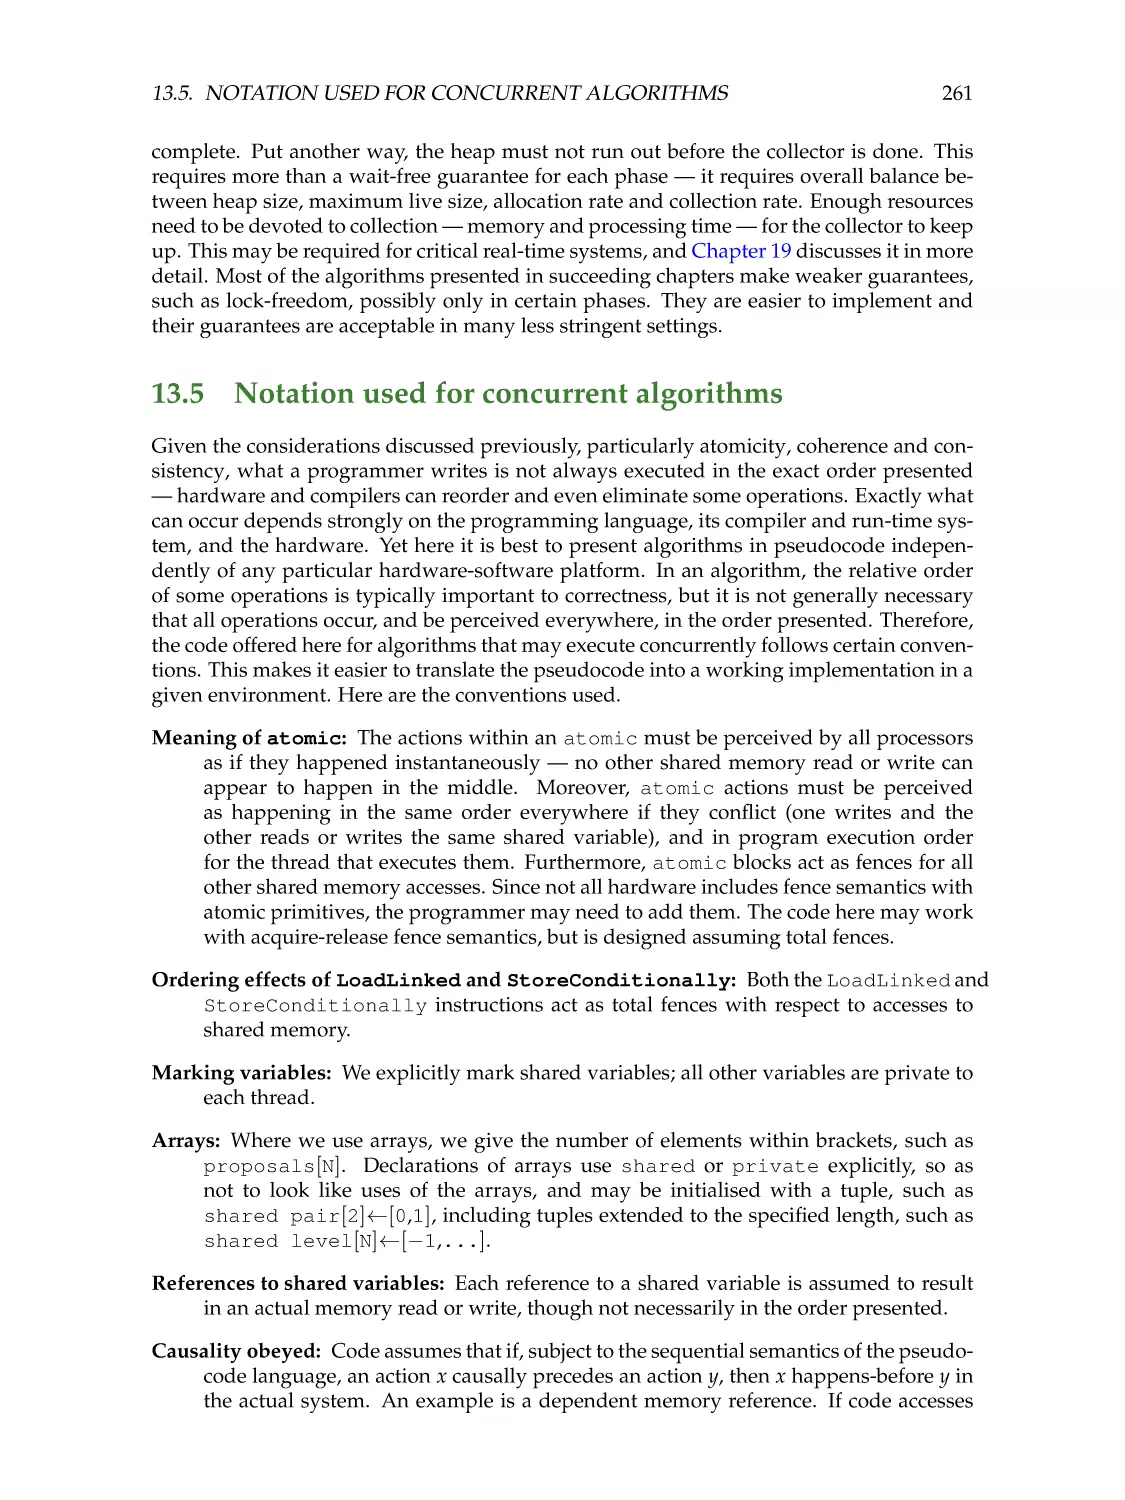 13.5. Notation used for concurrent algorithms